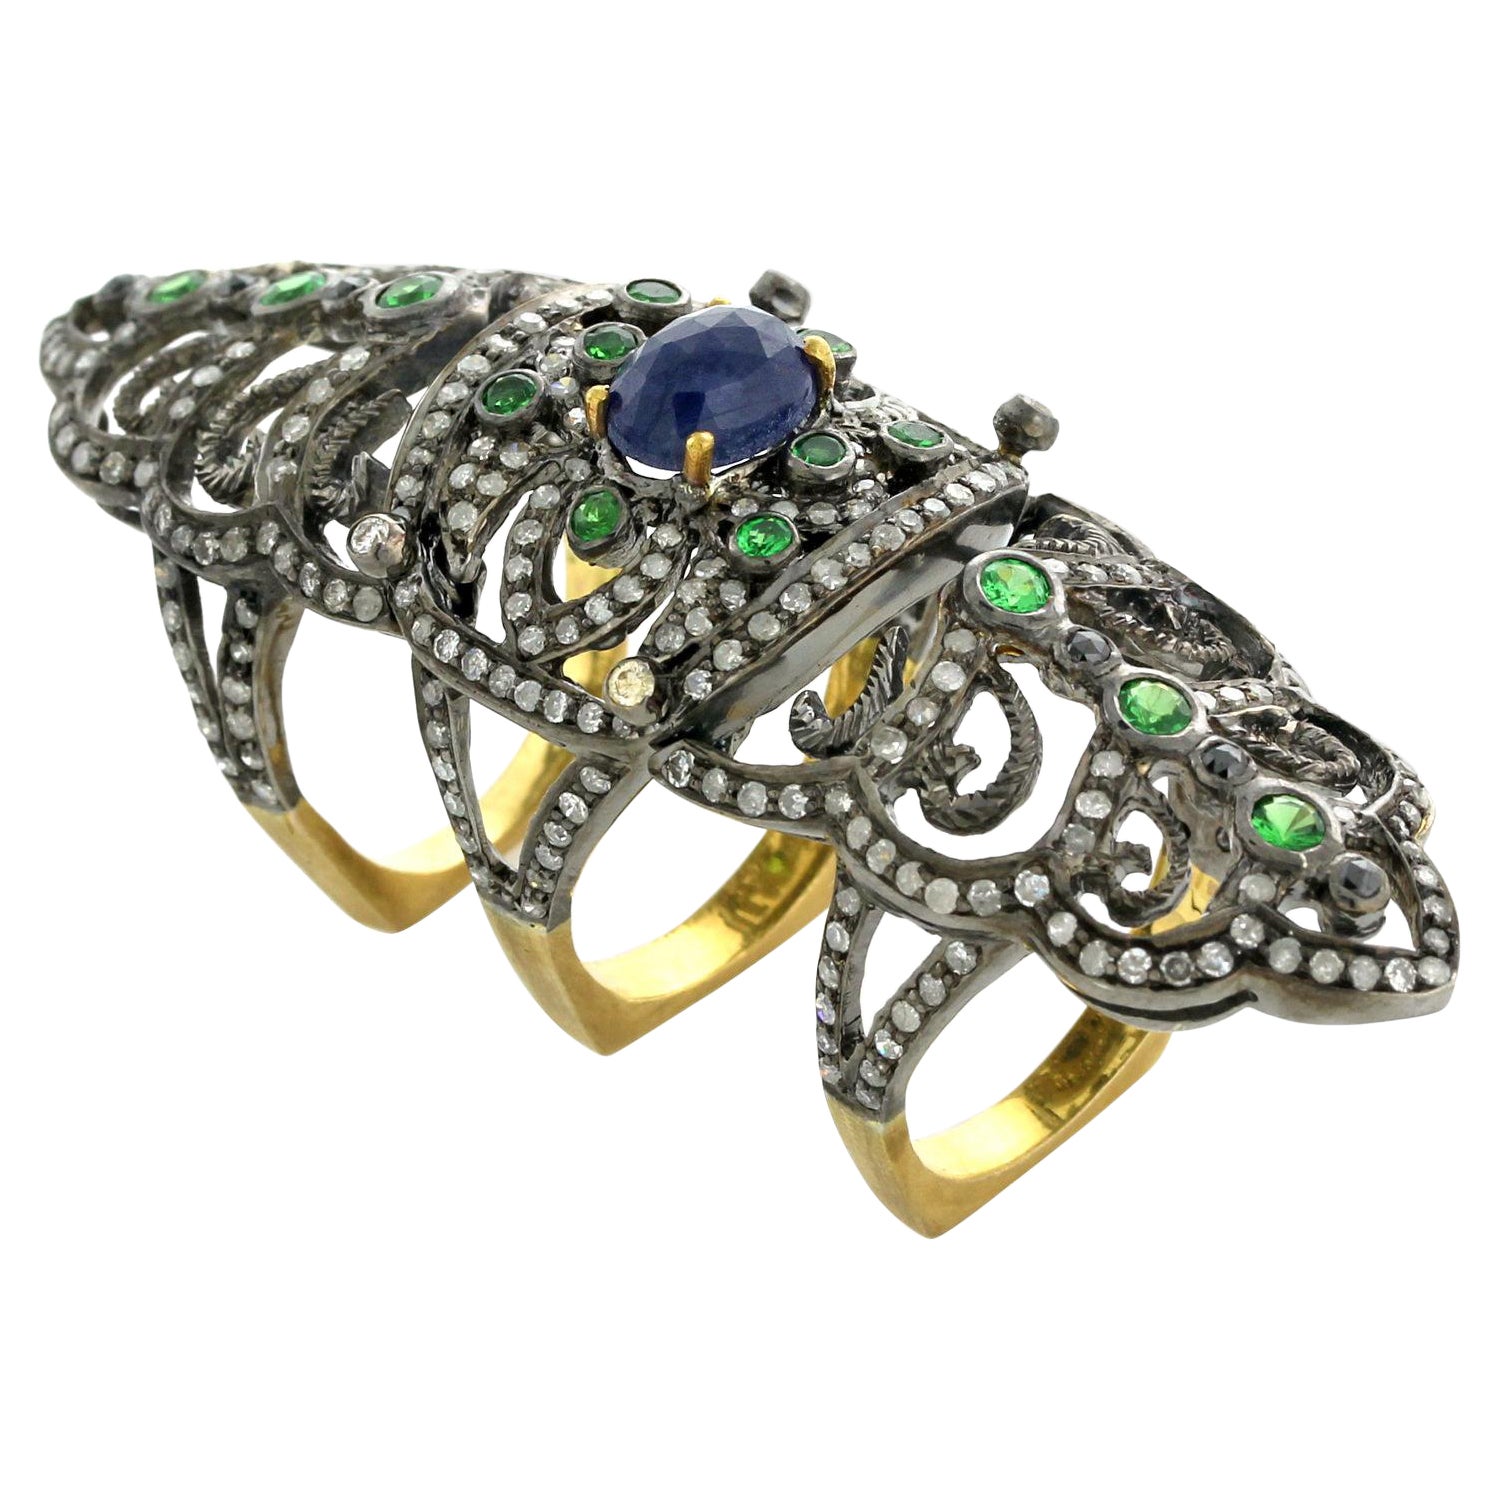 Designer Long Diamond, Blue Sapphire and Emerald Ring Set in 18K Gold and Silver For Sale